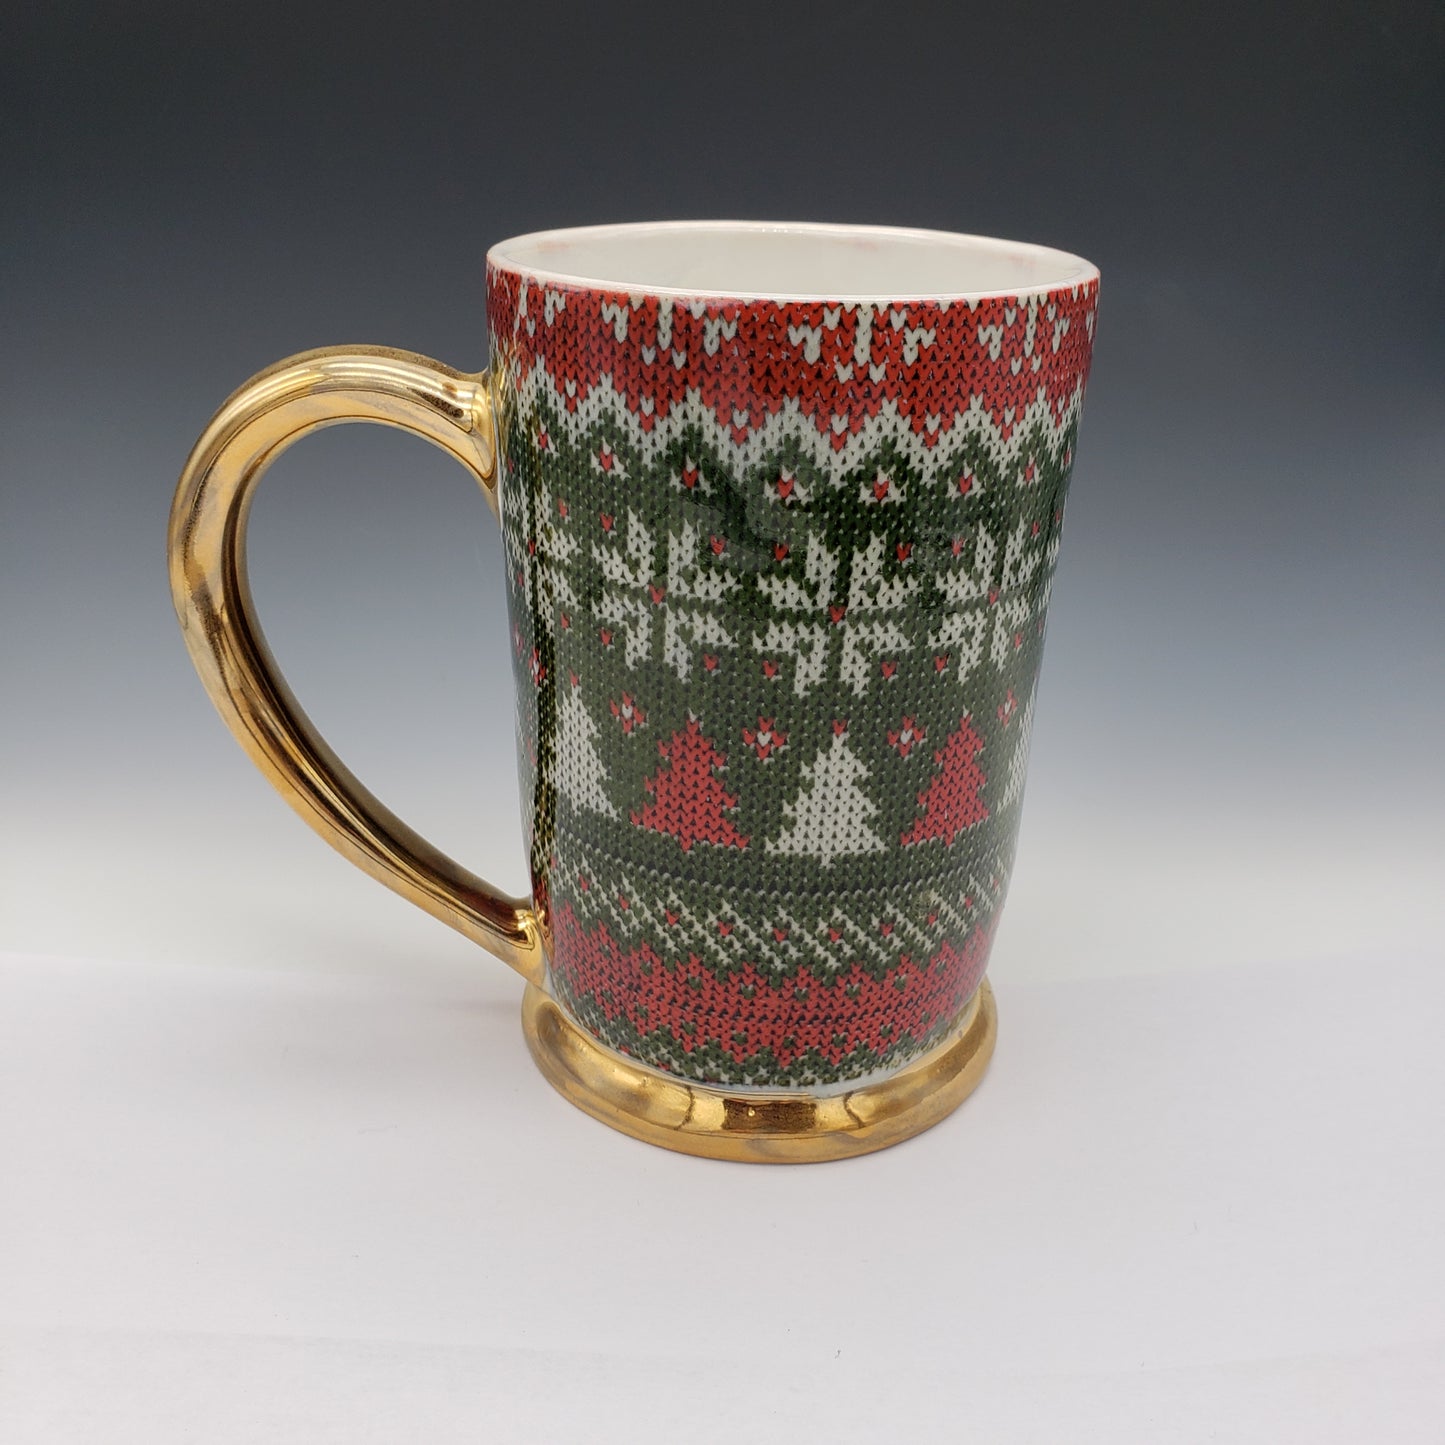 Red and green ugly sweater mug with 14k yellow gold handle and base